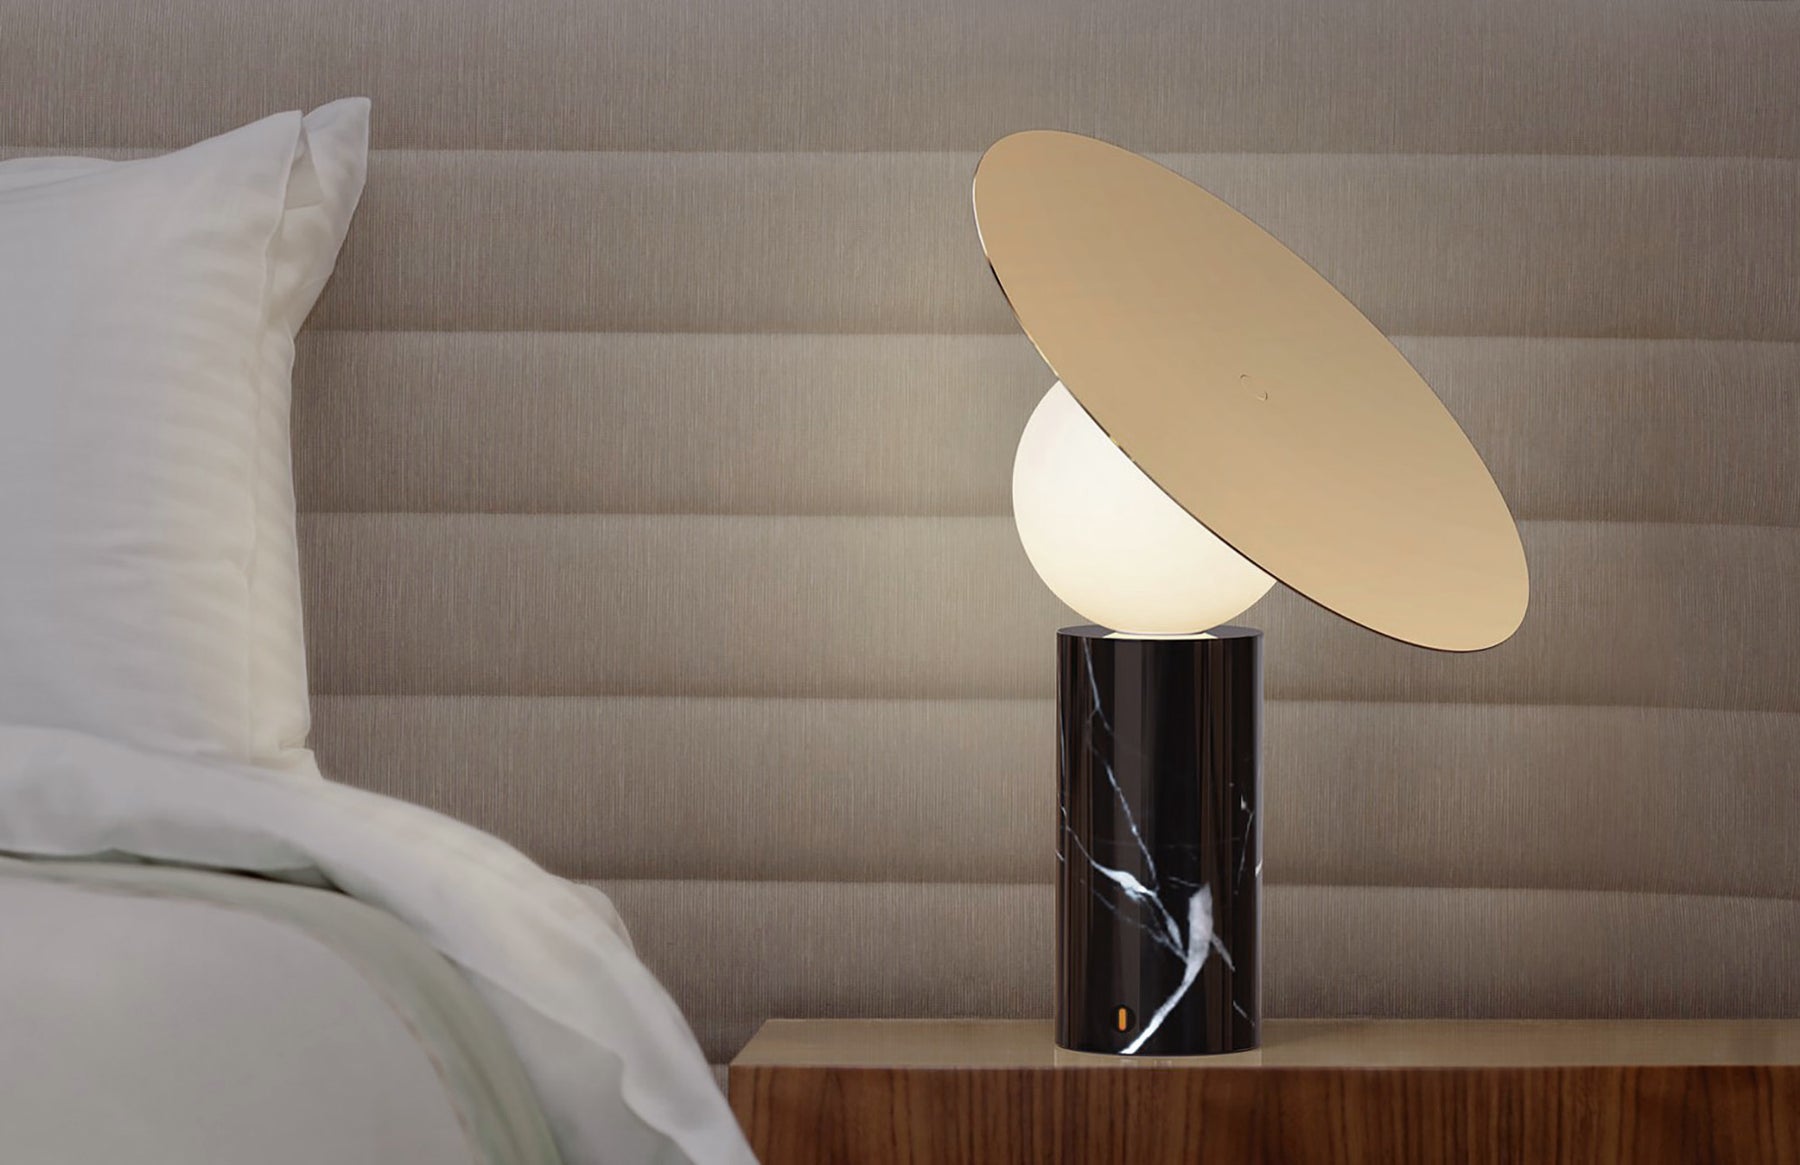 Mindfully using light to make your bedroom a more relaxing place